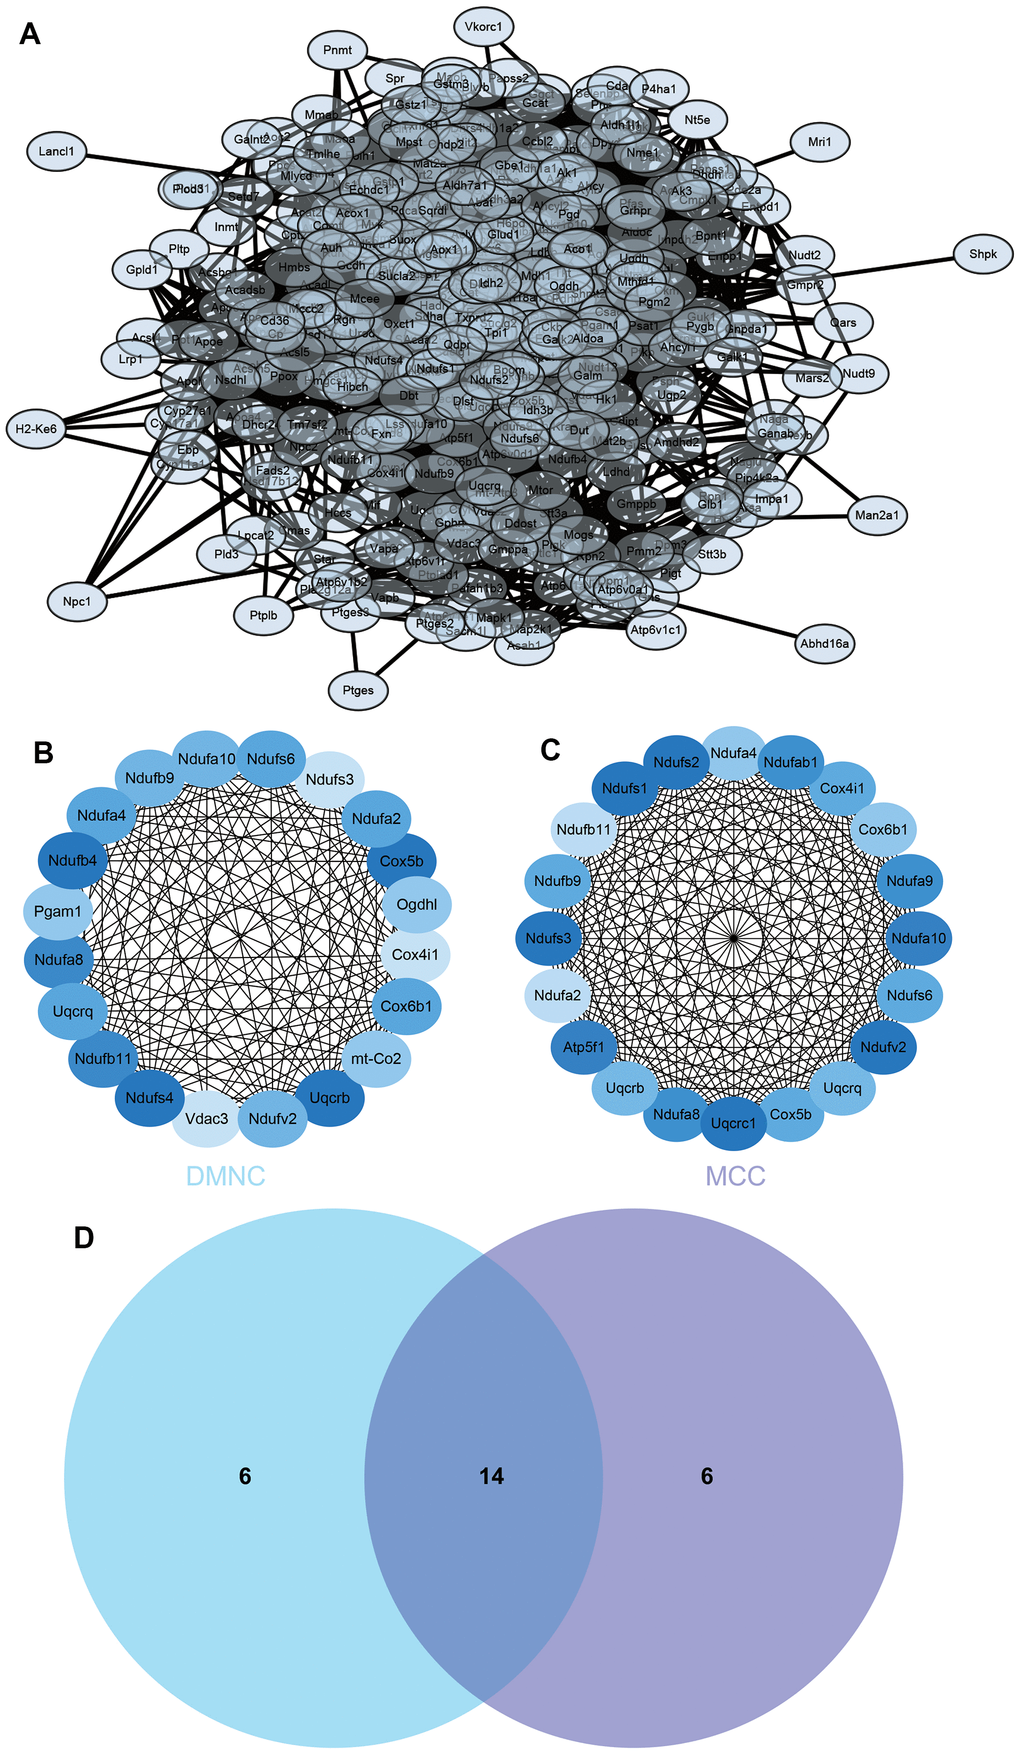 Construction and analysis of protein-protein interaction (PPI) networks. (A) The PPI network (B) DMNC algorithm was adopted to identify the core genes (C) MCC algorithm was adopted to identify the core genes (D) Venn diagram.